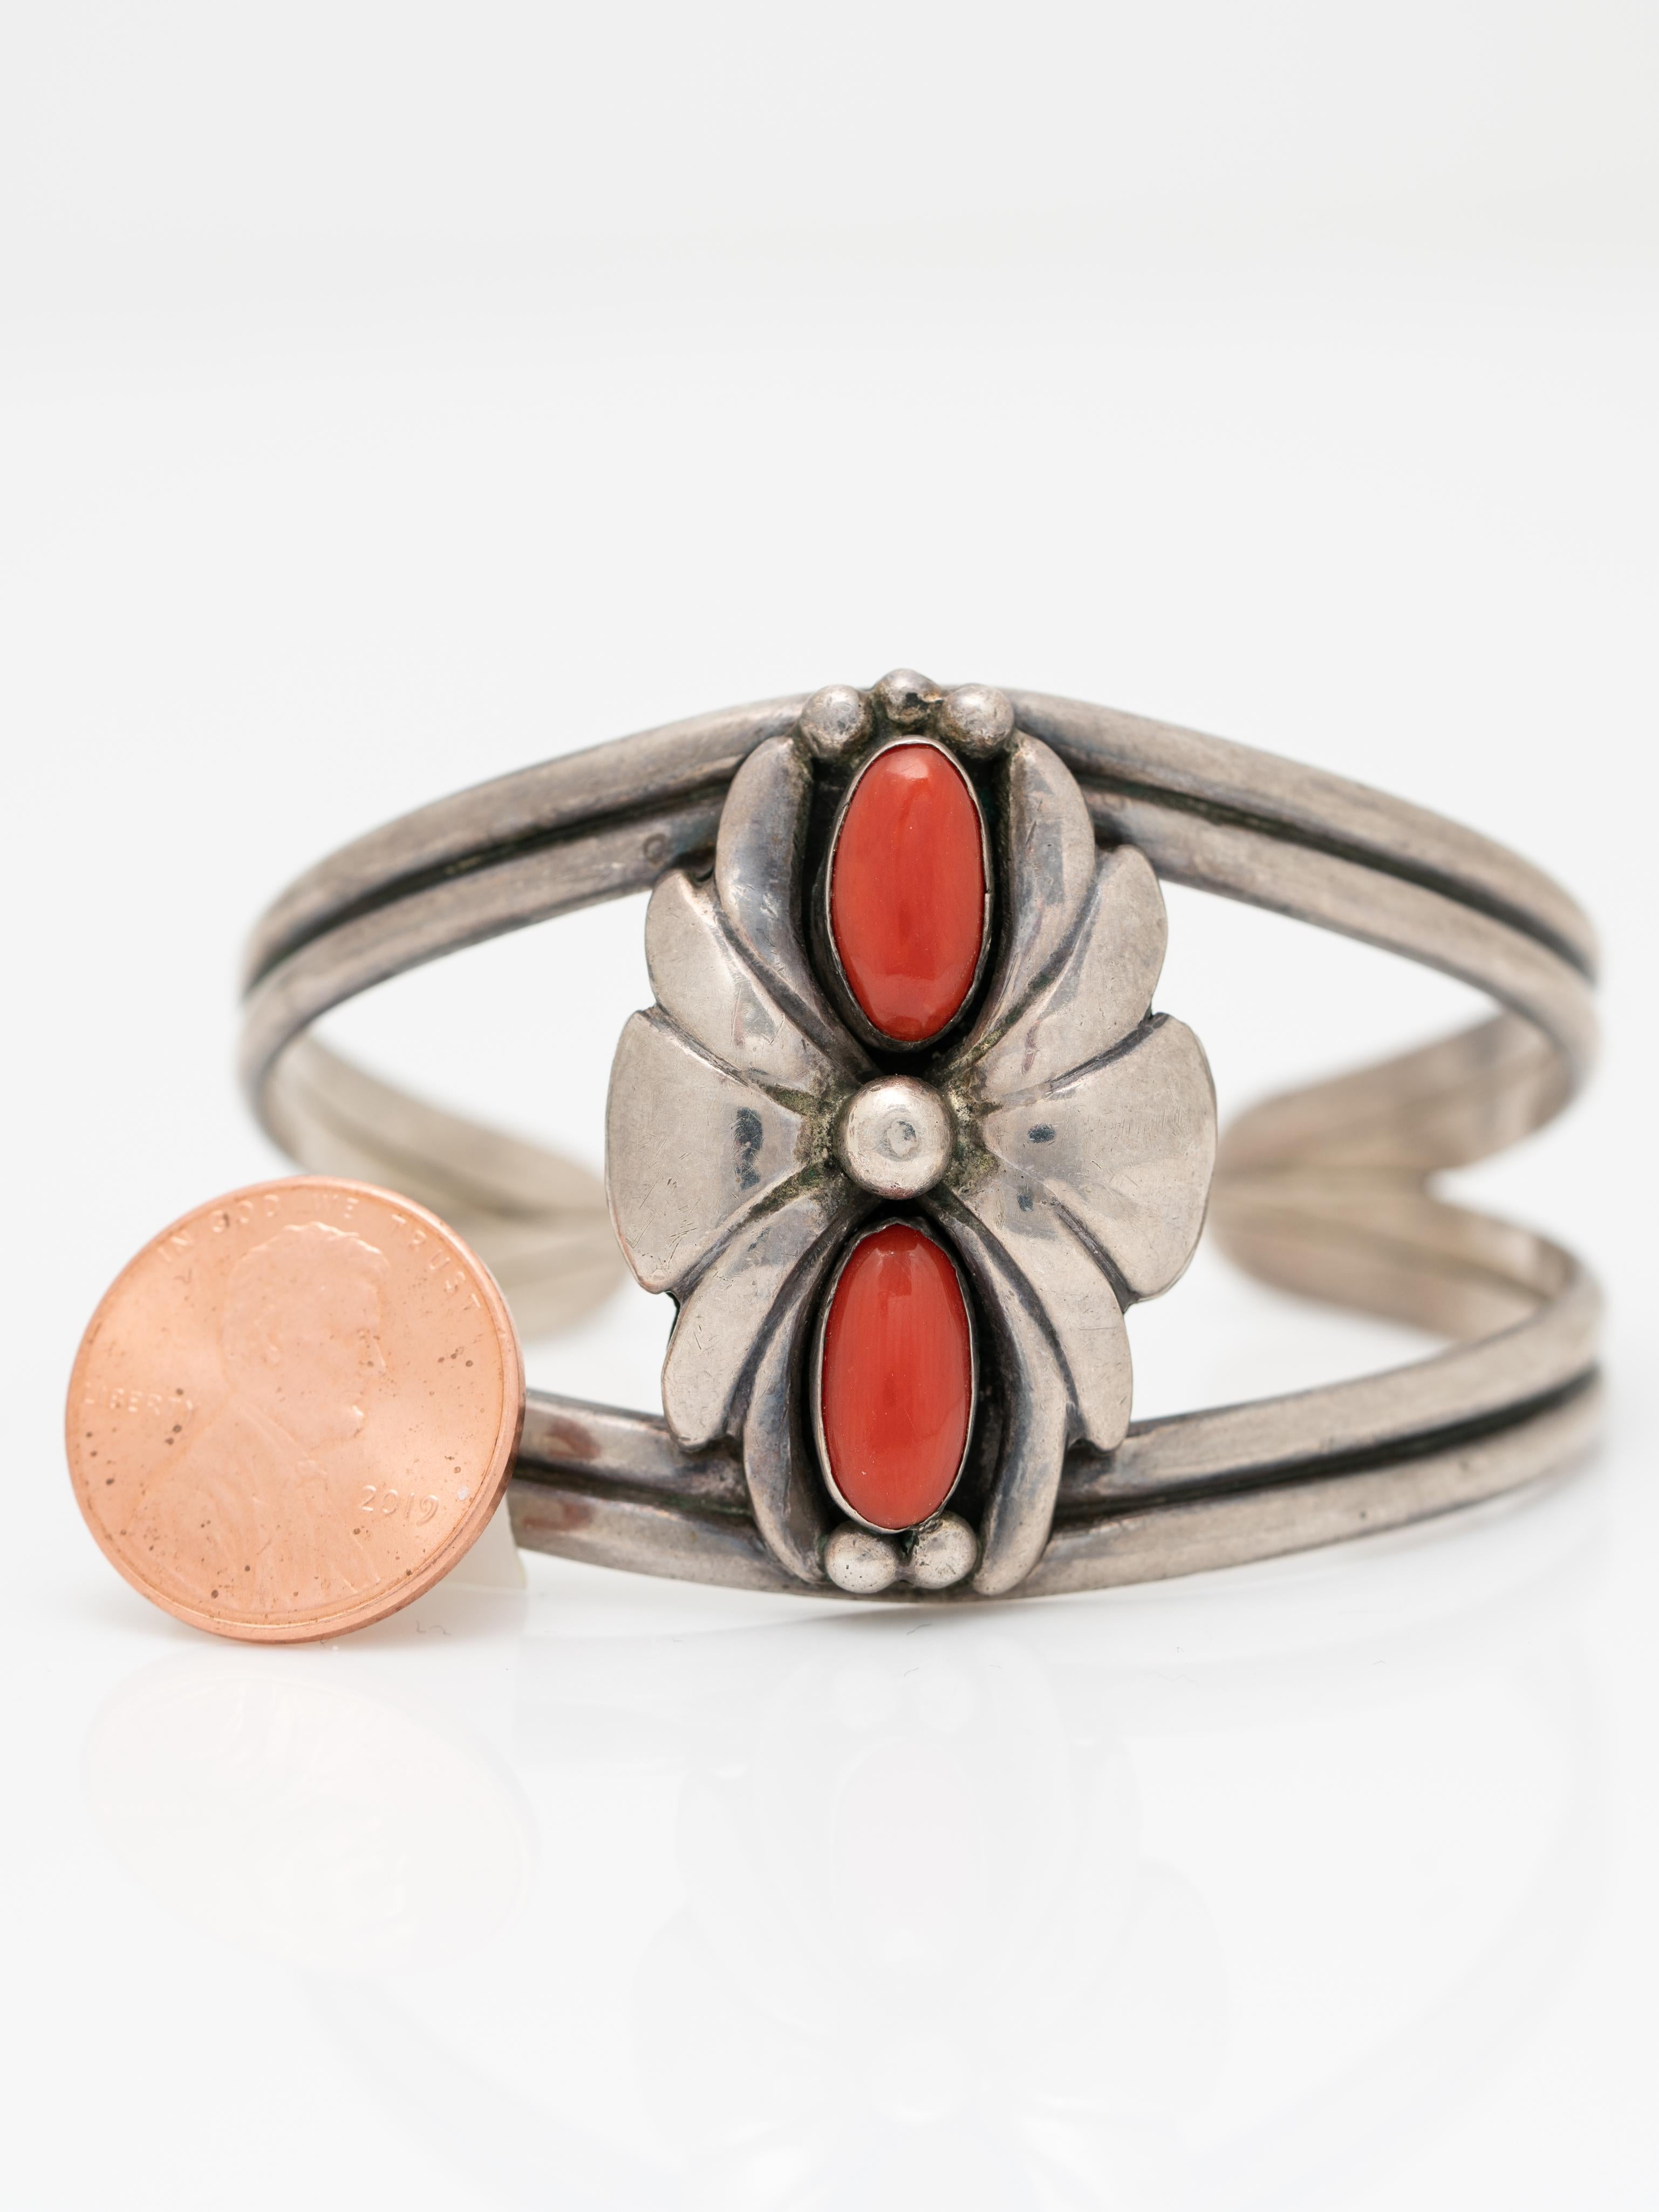 Vintage Native American Sterling Silver and Coral Navajo Cuff Bracelet 2